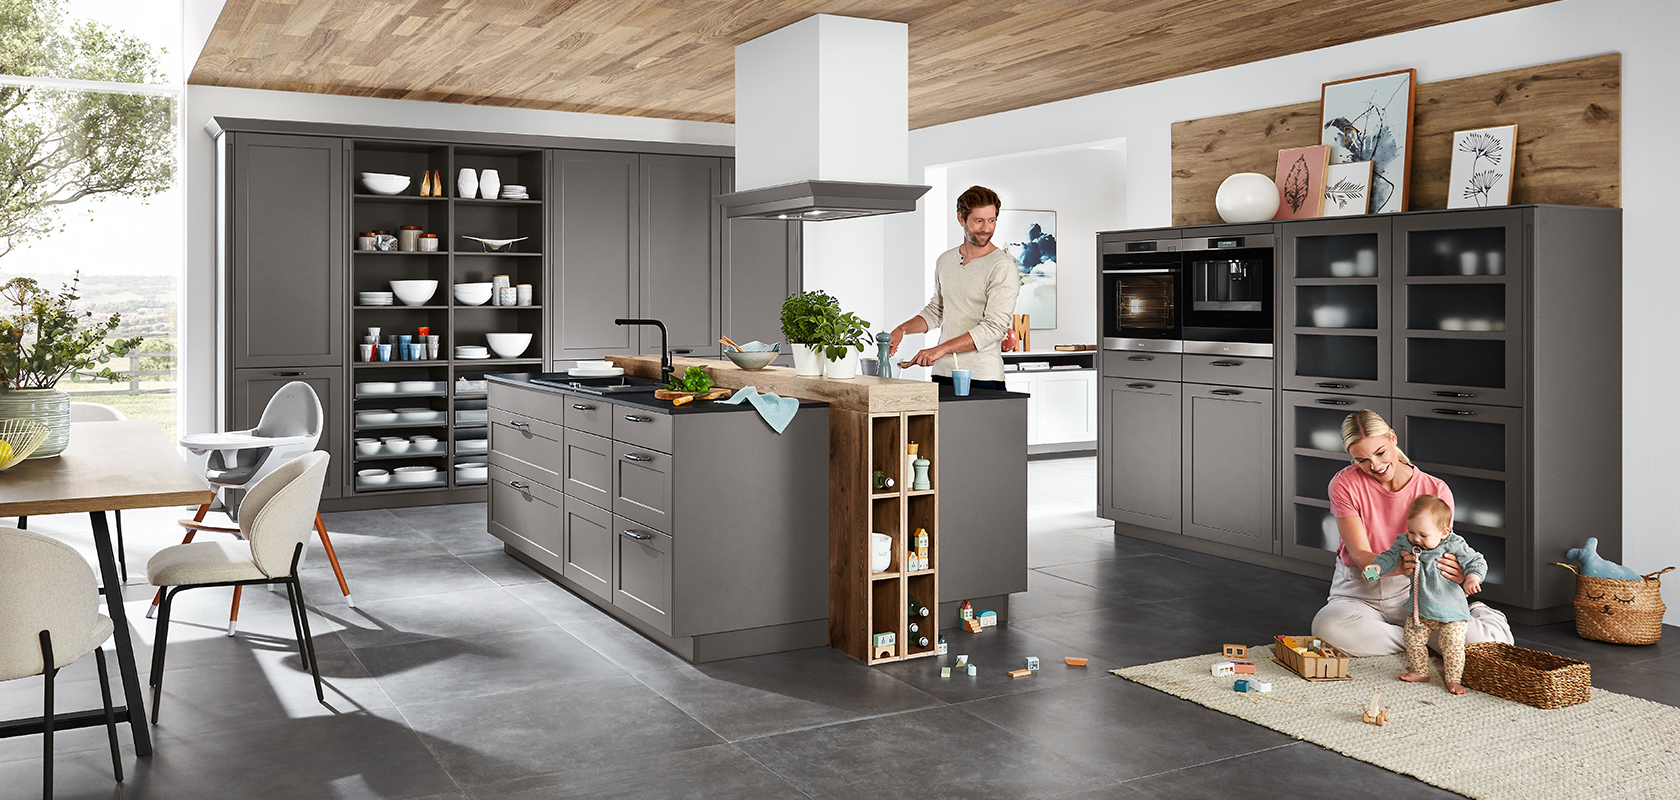 Contemporary kitchen scene with a family; an adult cooking, and another playing with a child amidst stylish gray cabinetry and modern appliances.